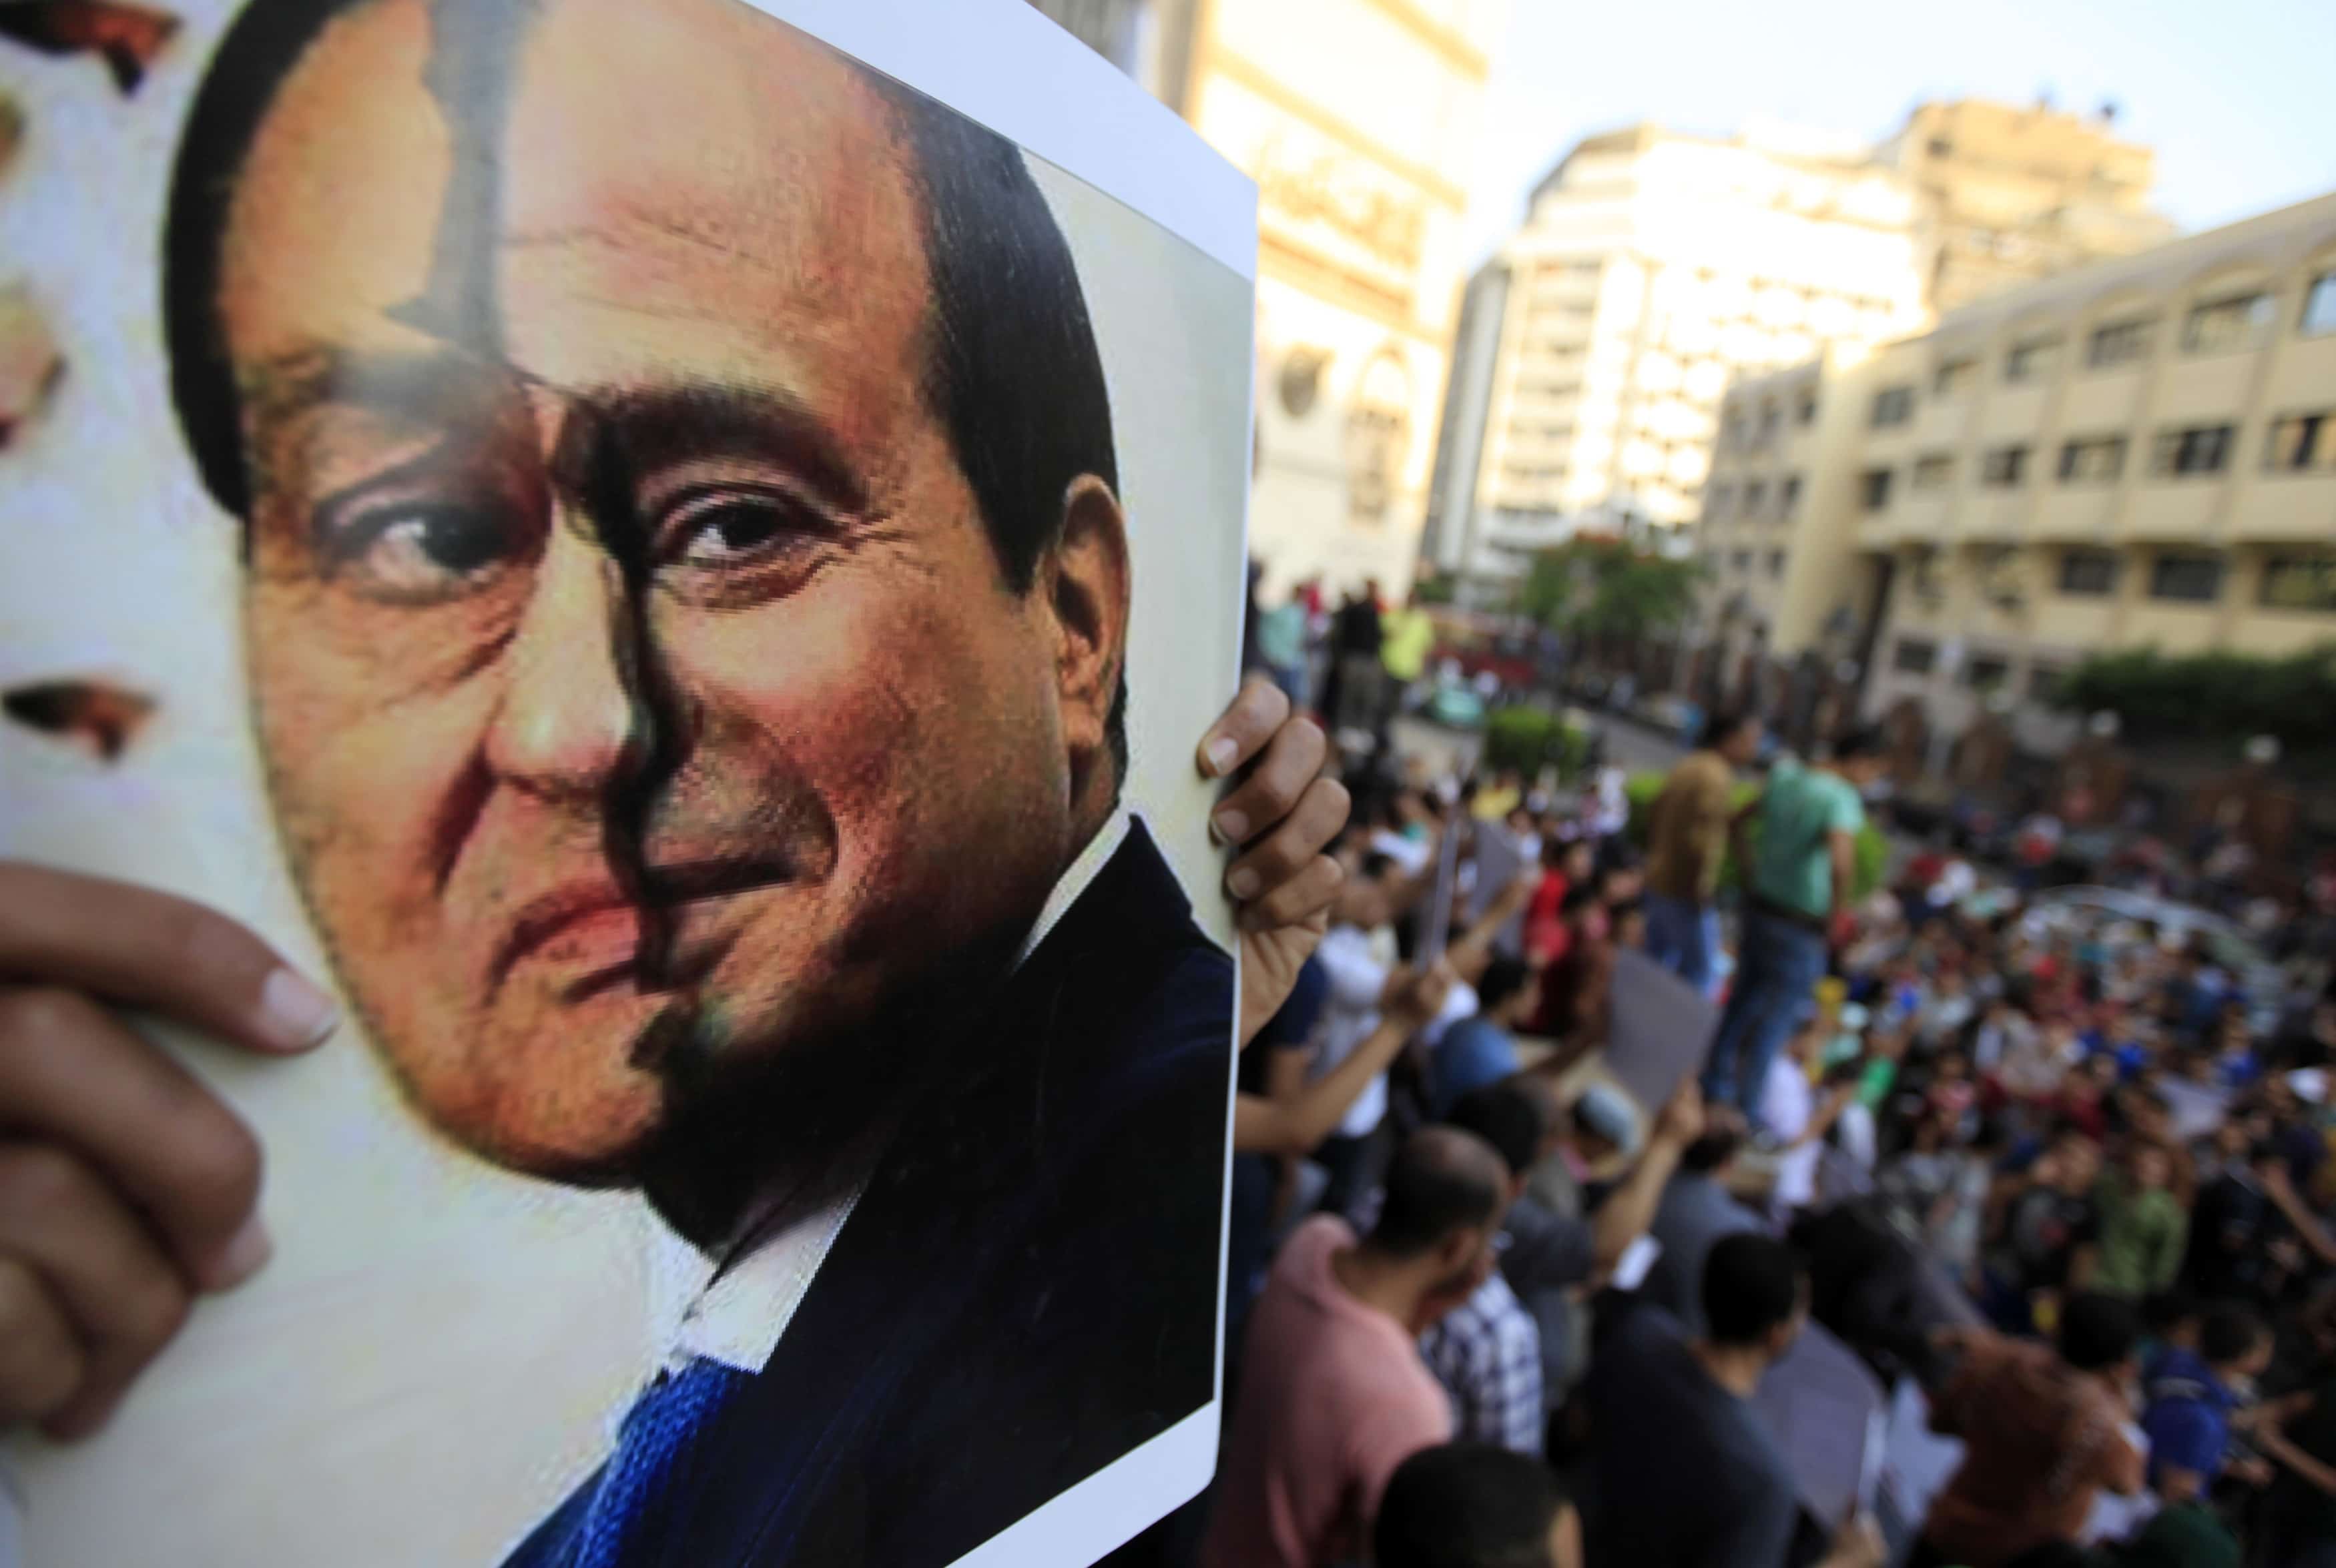 A poster show a placard with the faces of Egypt's ousted President Hosni Mubarak (L) and President Abdel Fattah al-Sisi is seen by activists during a protest against Sisi's crackdown on activists, in Cairo on 24 May 2014 , REUTERS/Amr Abdallah Dalsh